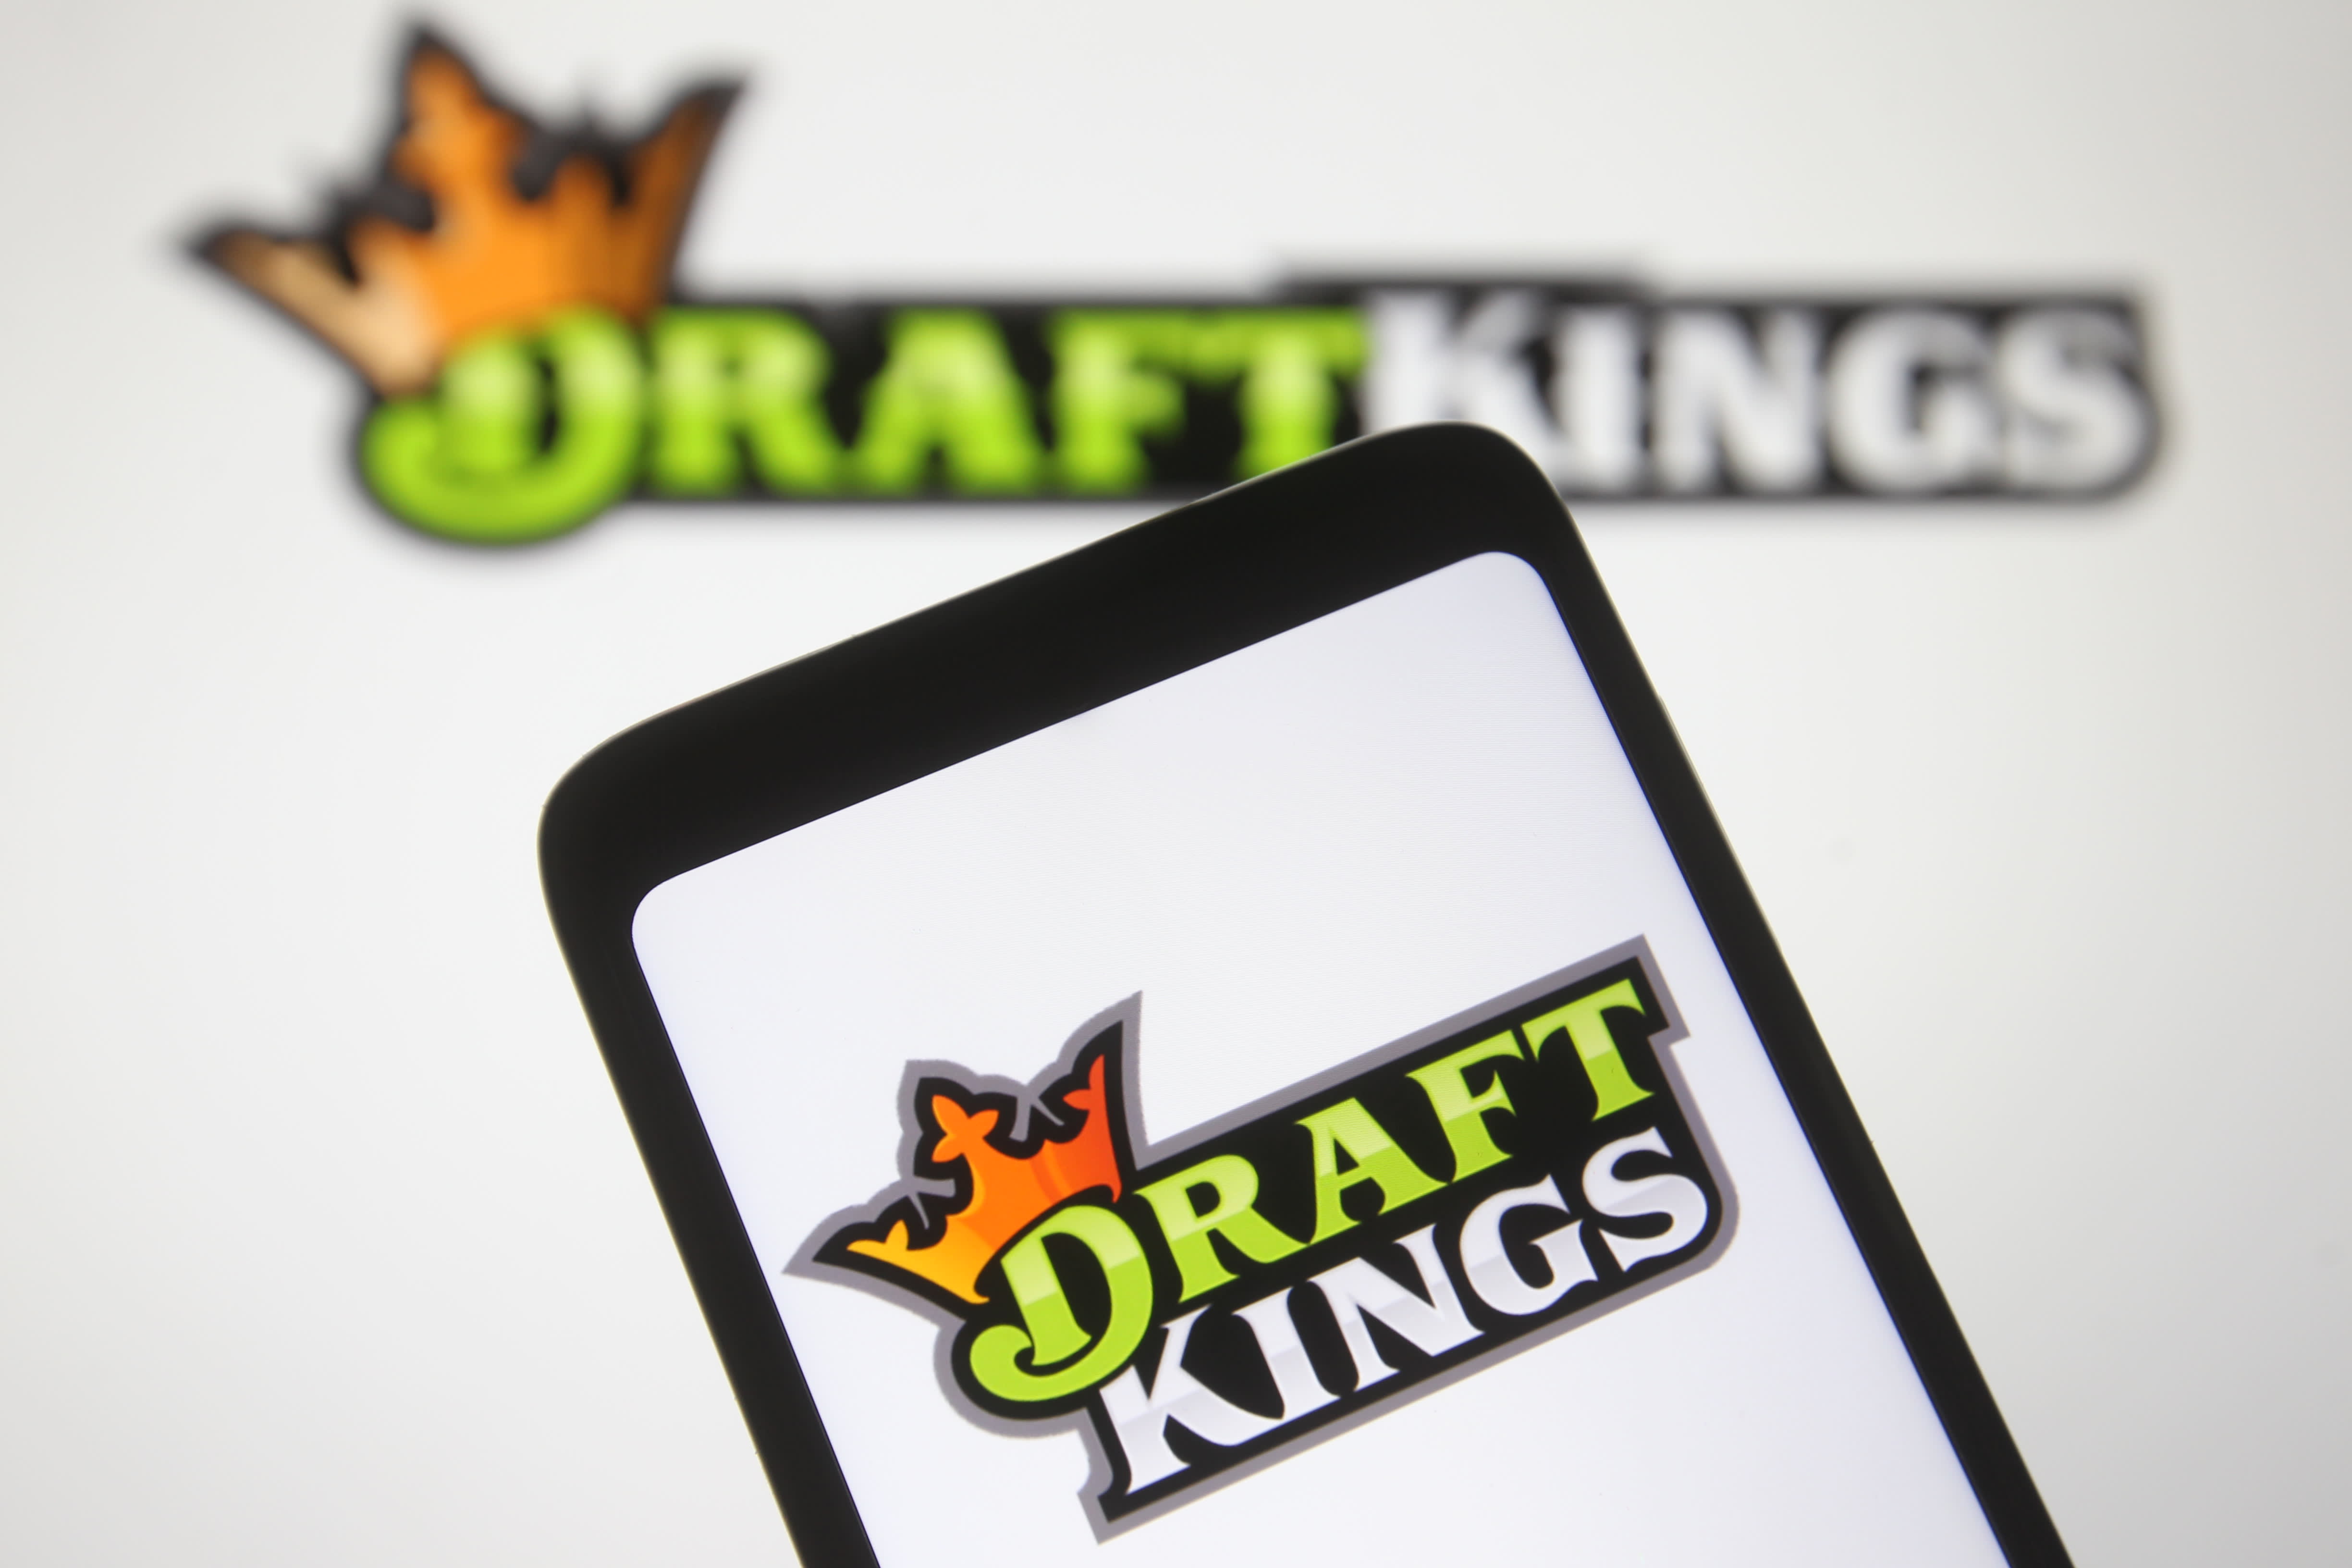 DraftKings CEO dismisses stock plunge says it’s a ‘wild market right now’ – CNBC